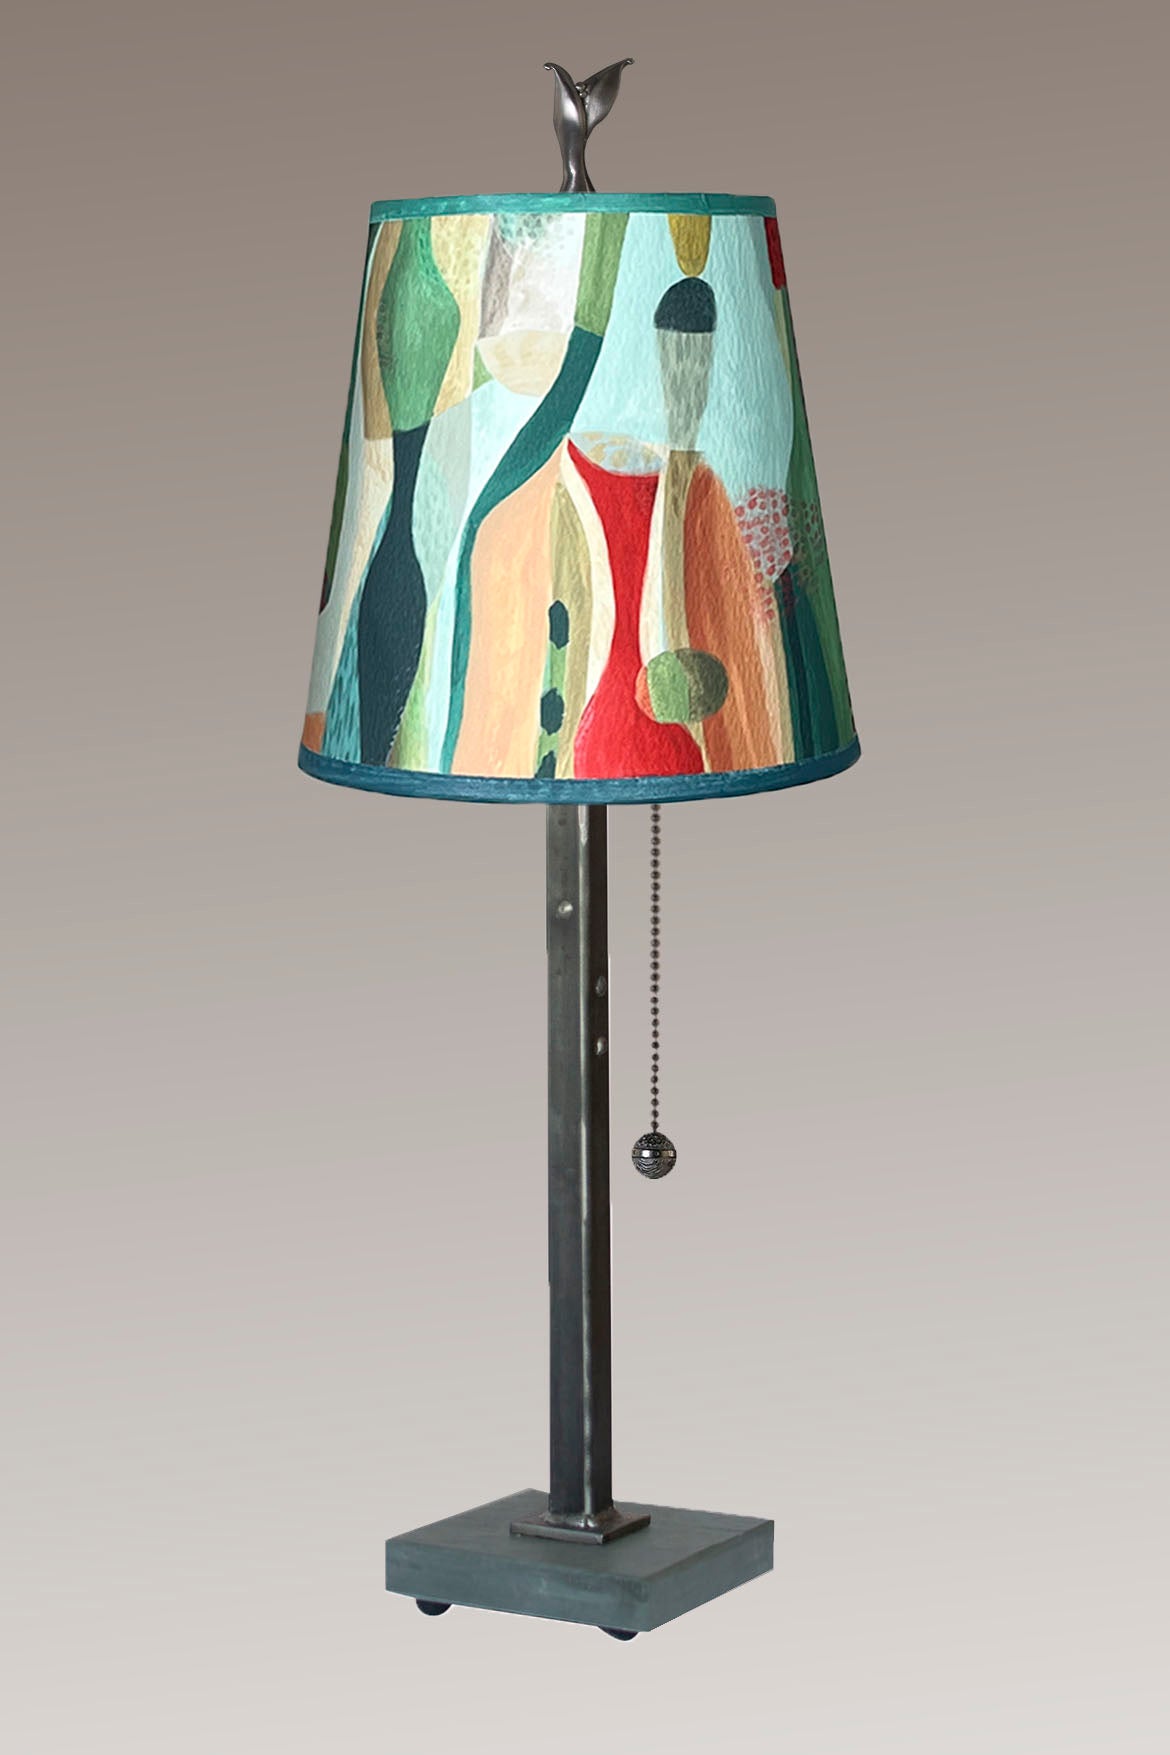 Janna Ugone &amp; Co Table Lamp Steel Table Lamp with Small Drum Shade in Riviera in Poppy